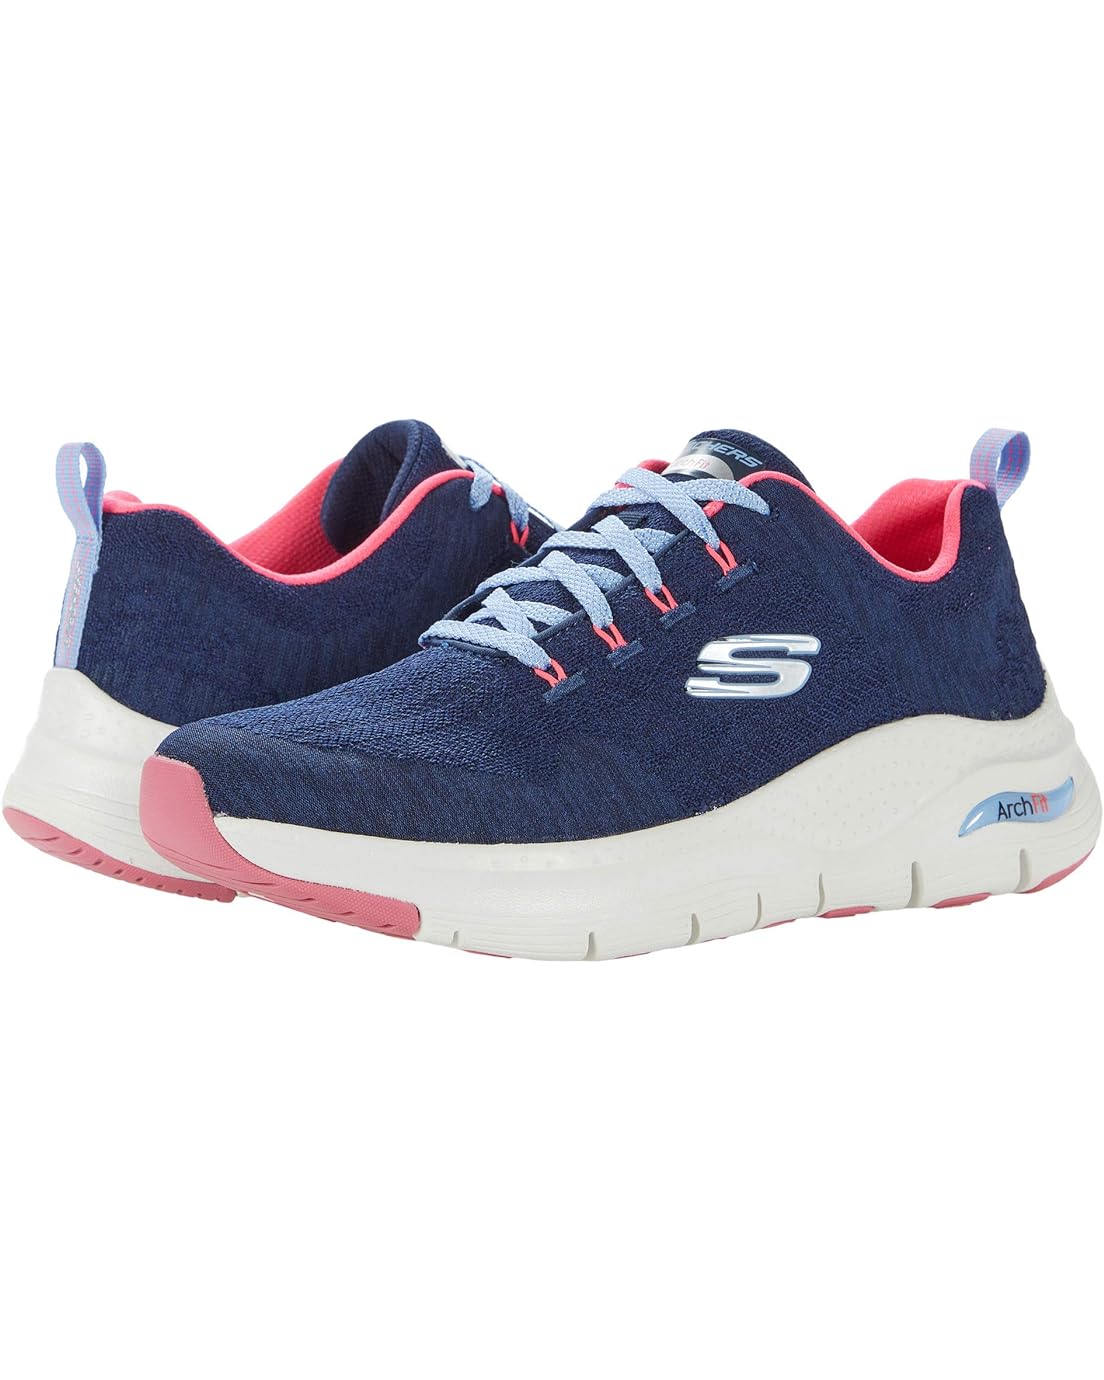 SKECHERS Arch Fit Comfy Wave Sneakers